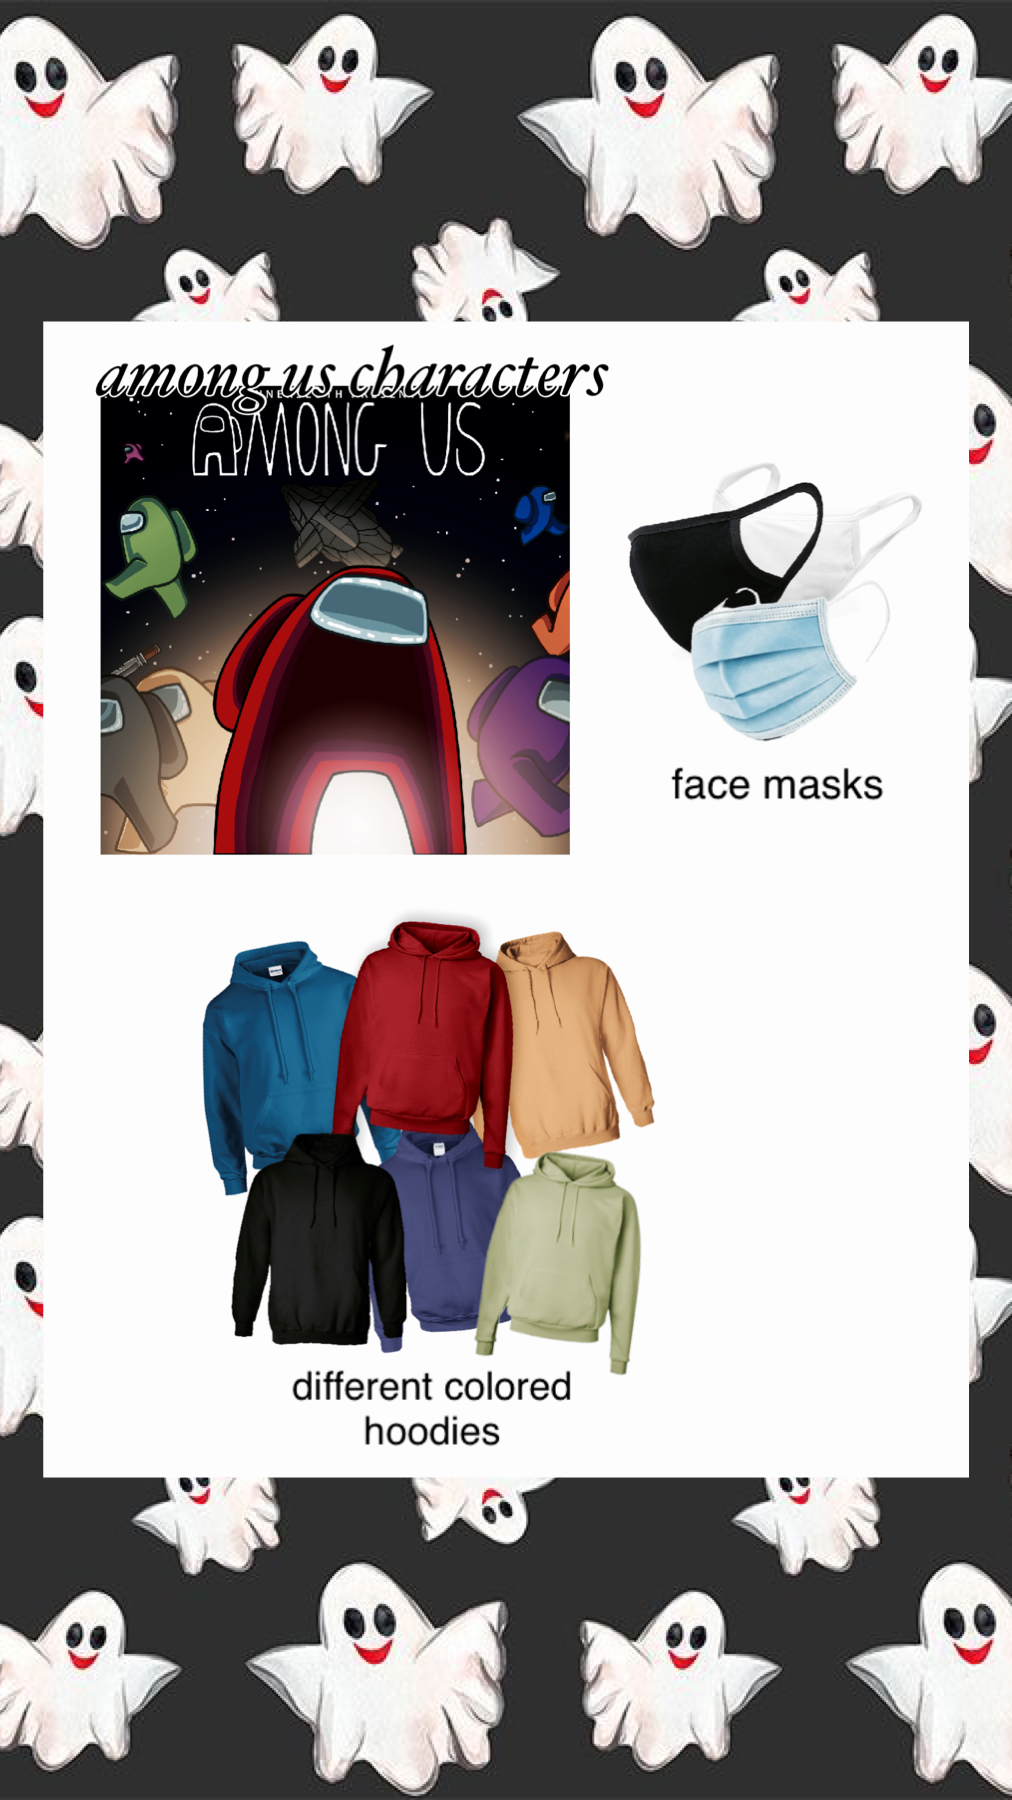 🔪 AMONG US 🔪
This hit game provides a fun and easy large group costume. Grab a hoodie, face mask, and discover the imposter!